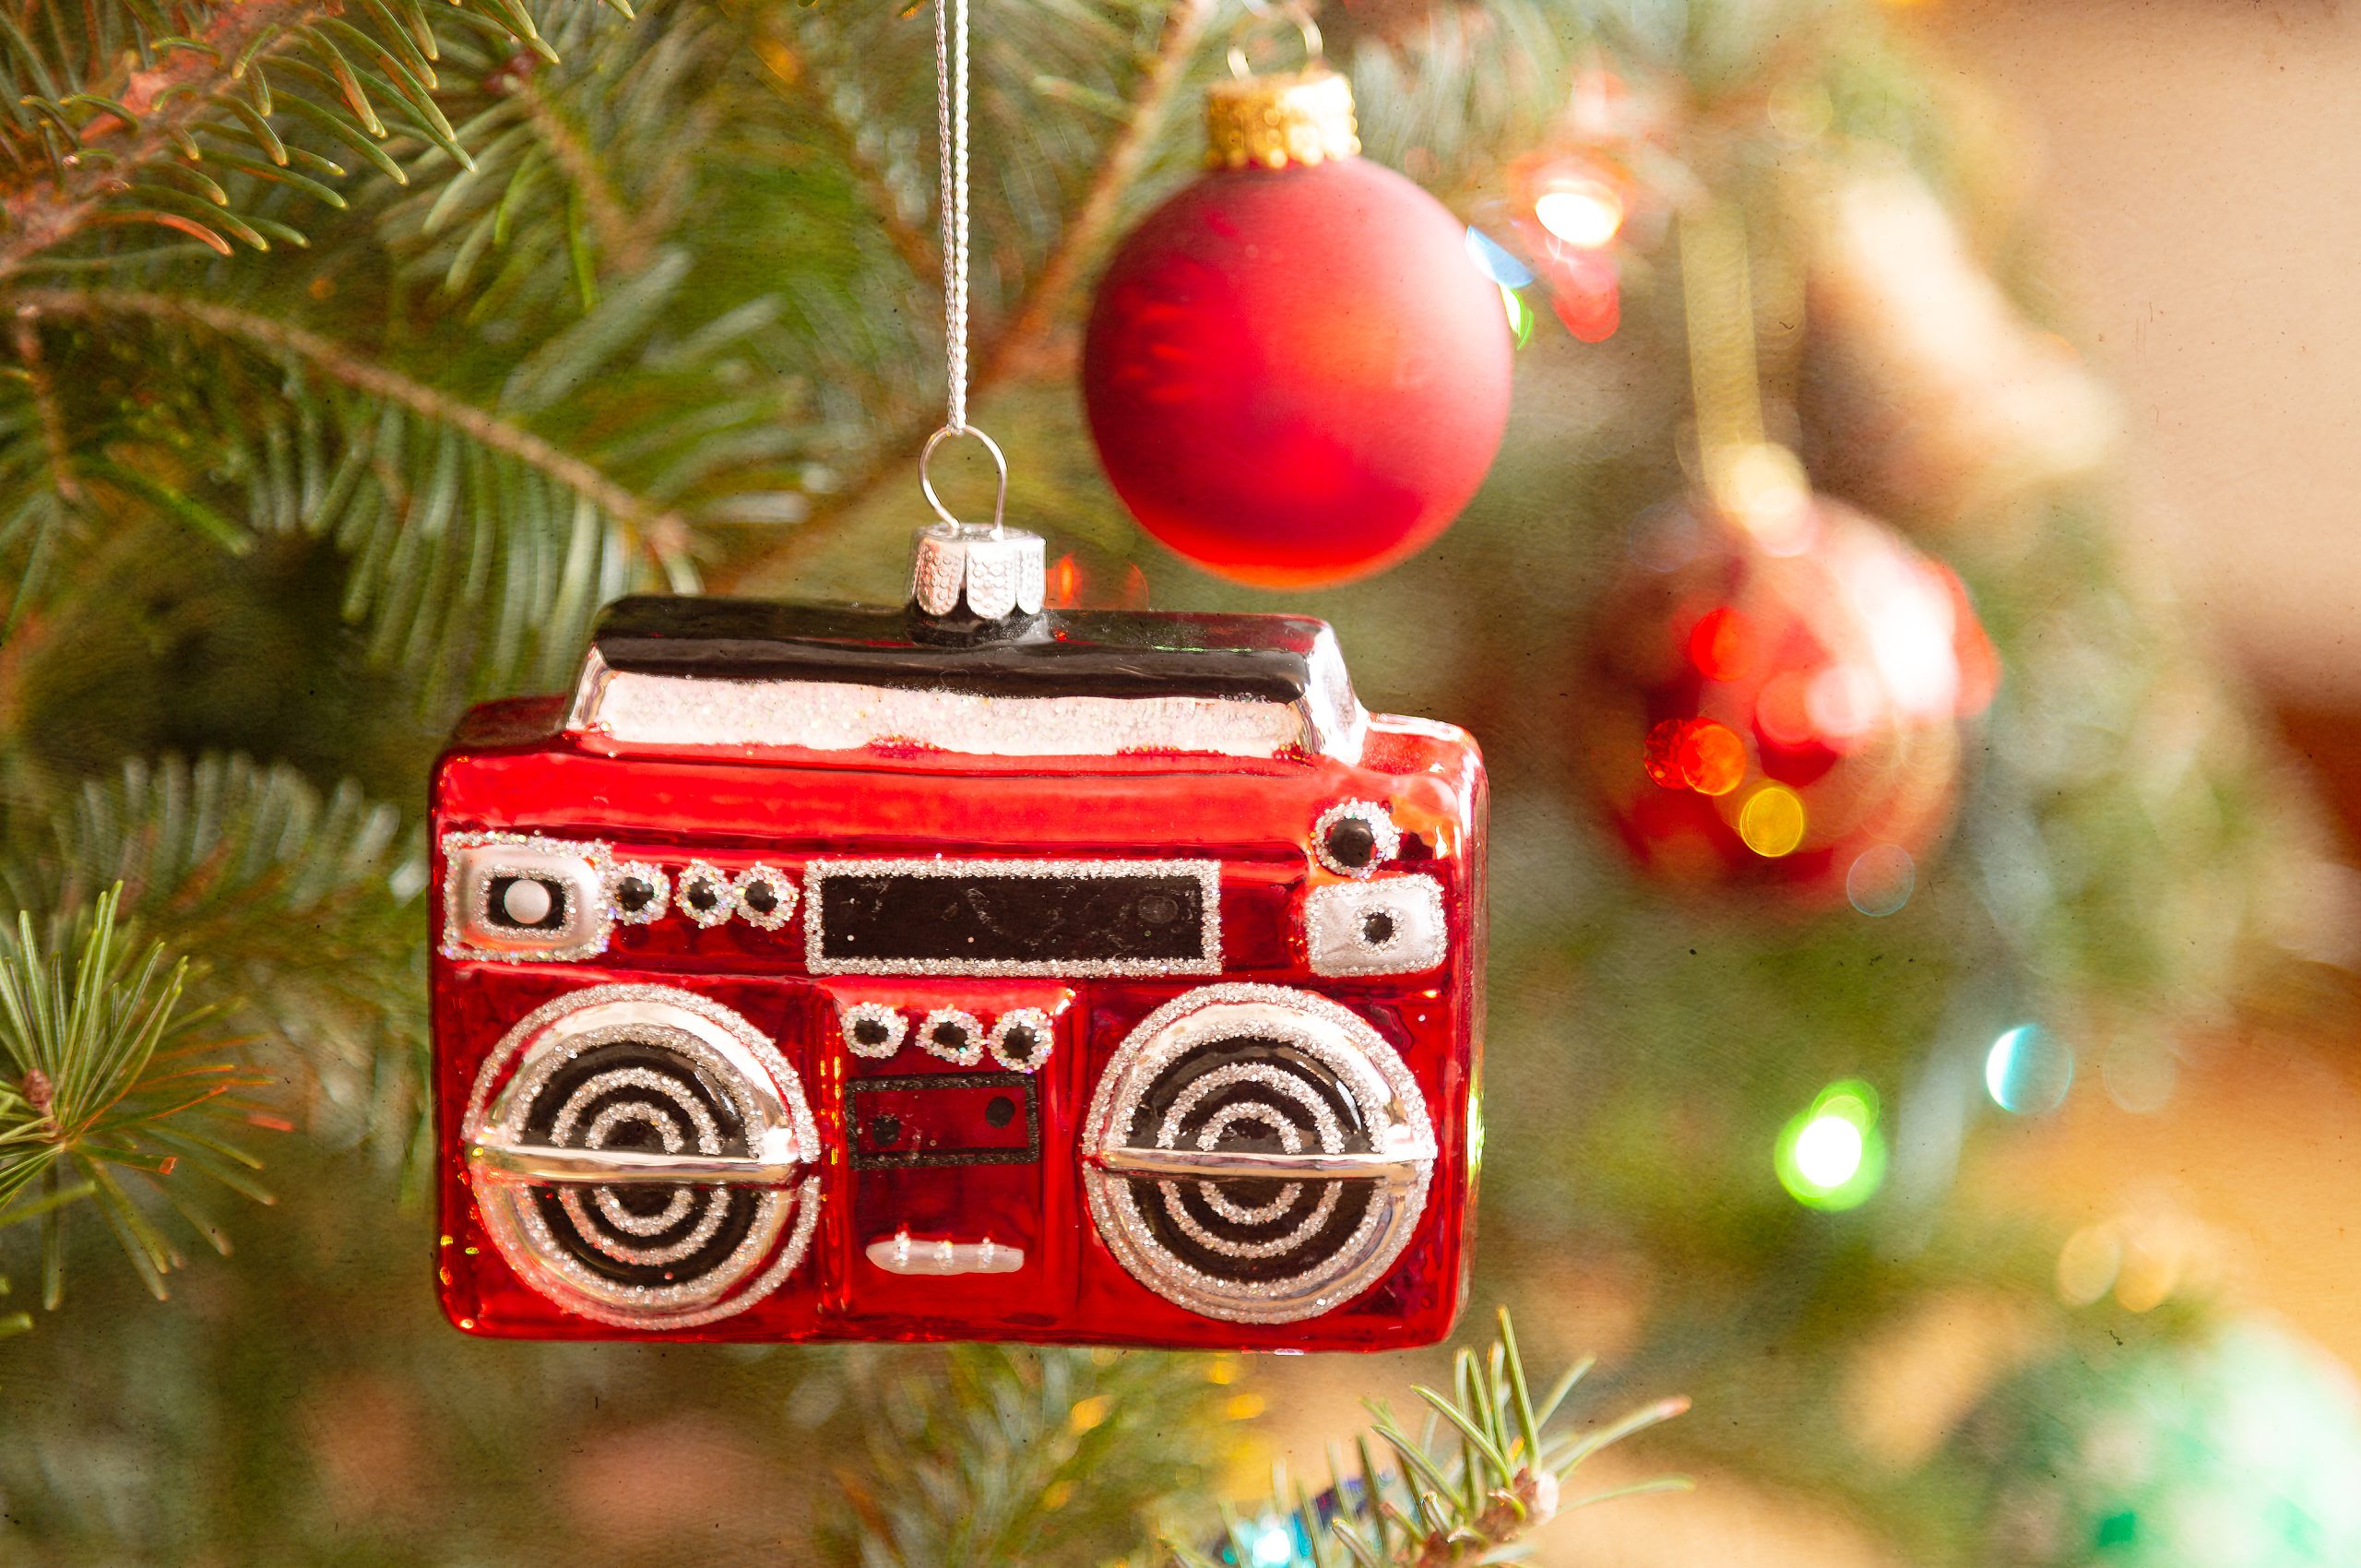 A christmas ornament in the shape of a radio or boom box hanging on the Christmas tree.